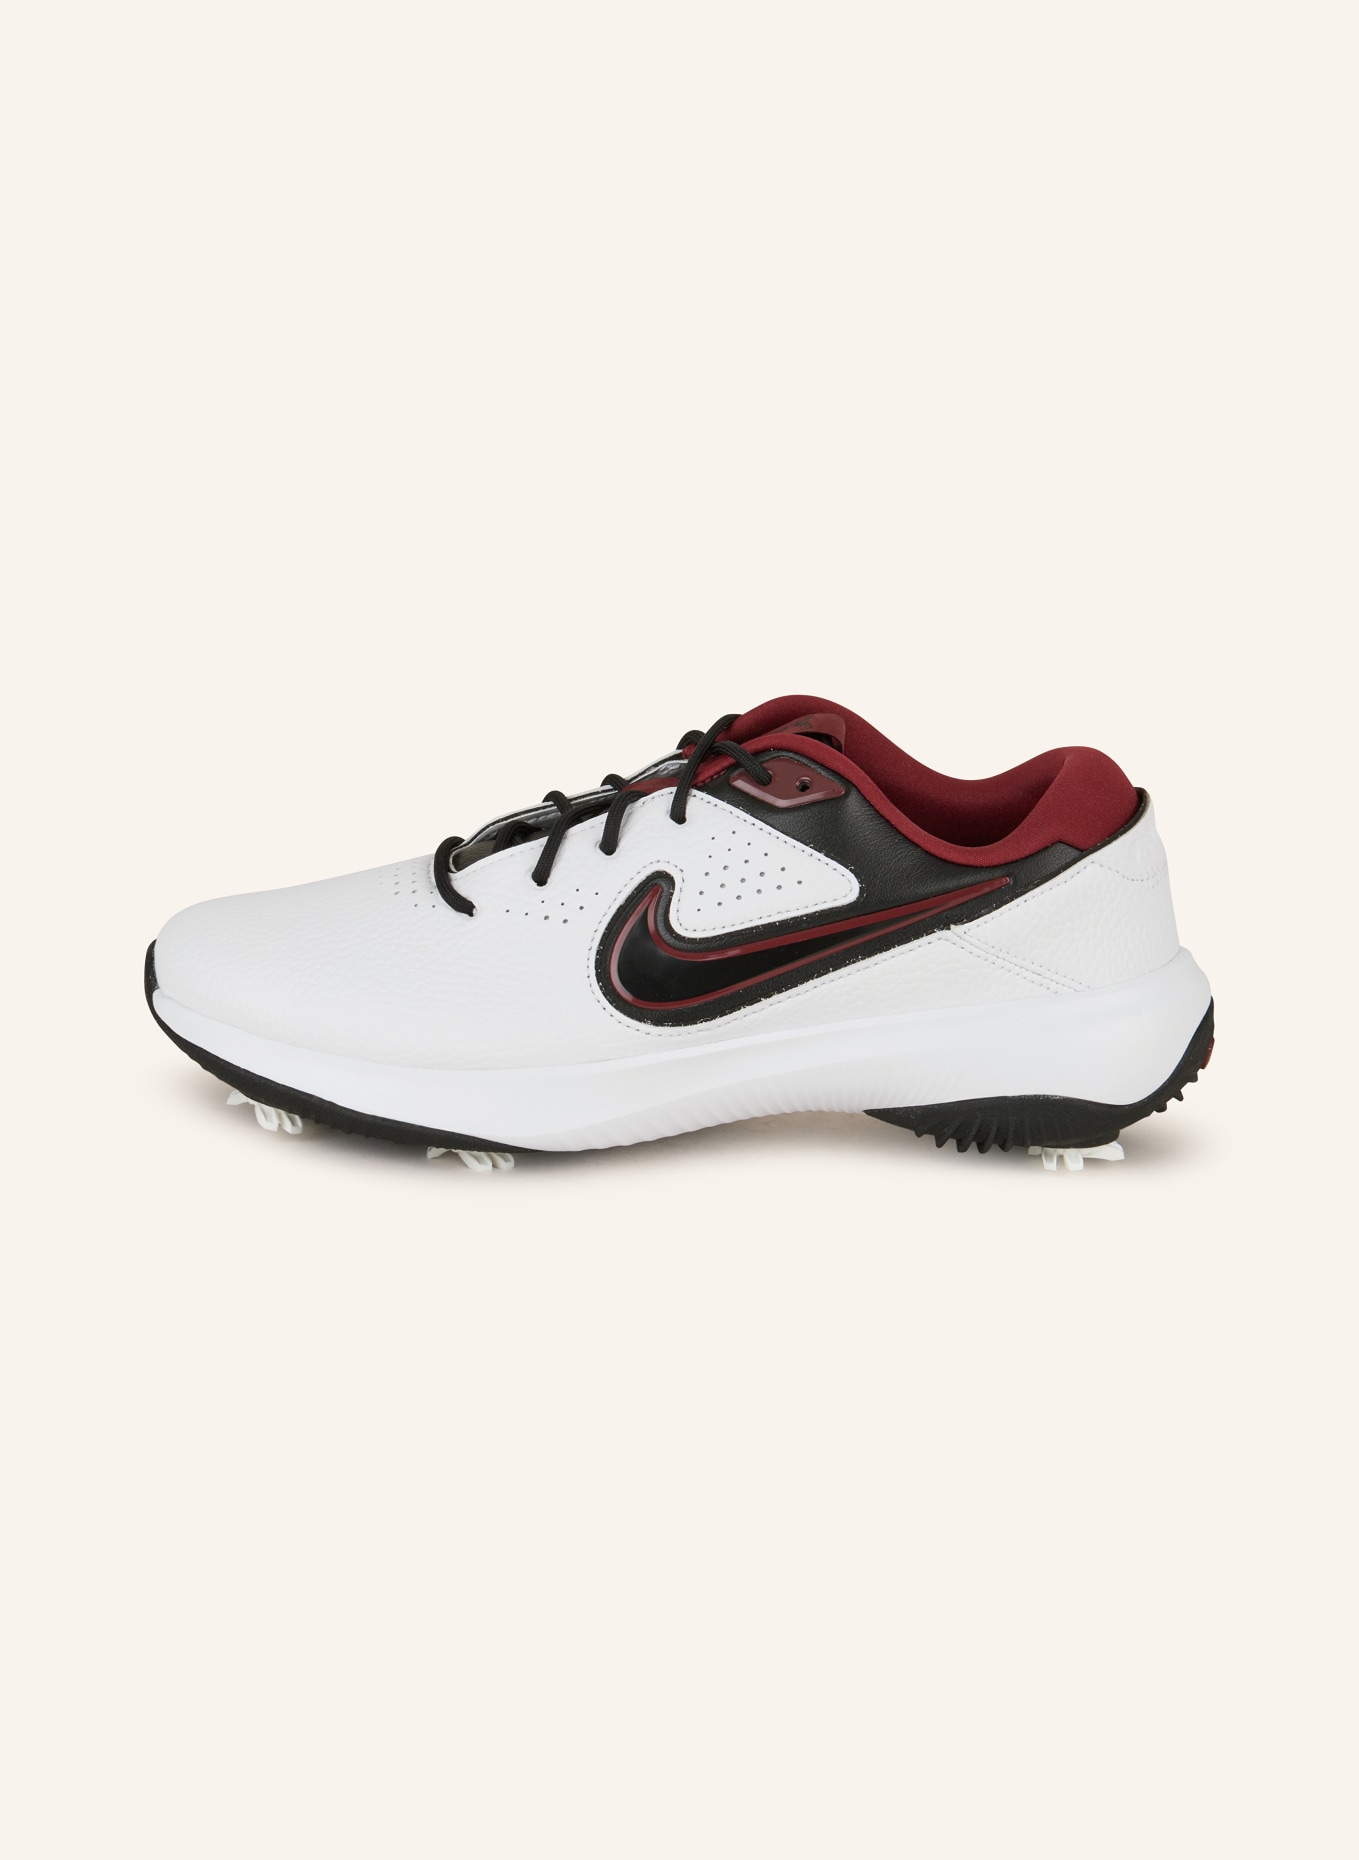 Nike Golf shoes VICTORY PRO 3, Color: WHITE/ BLACK/ DARK RED (Image 4)